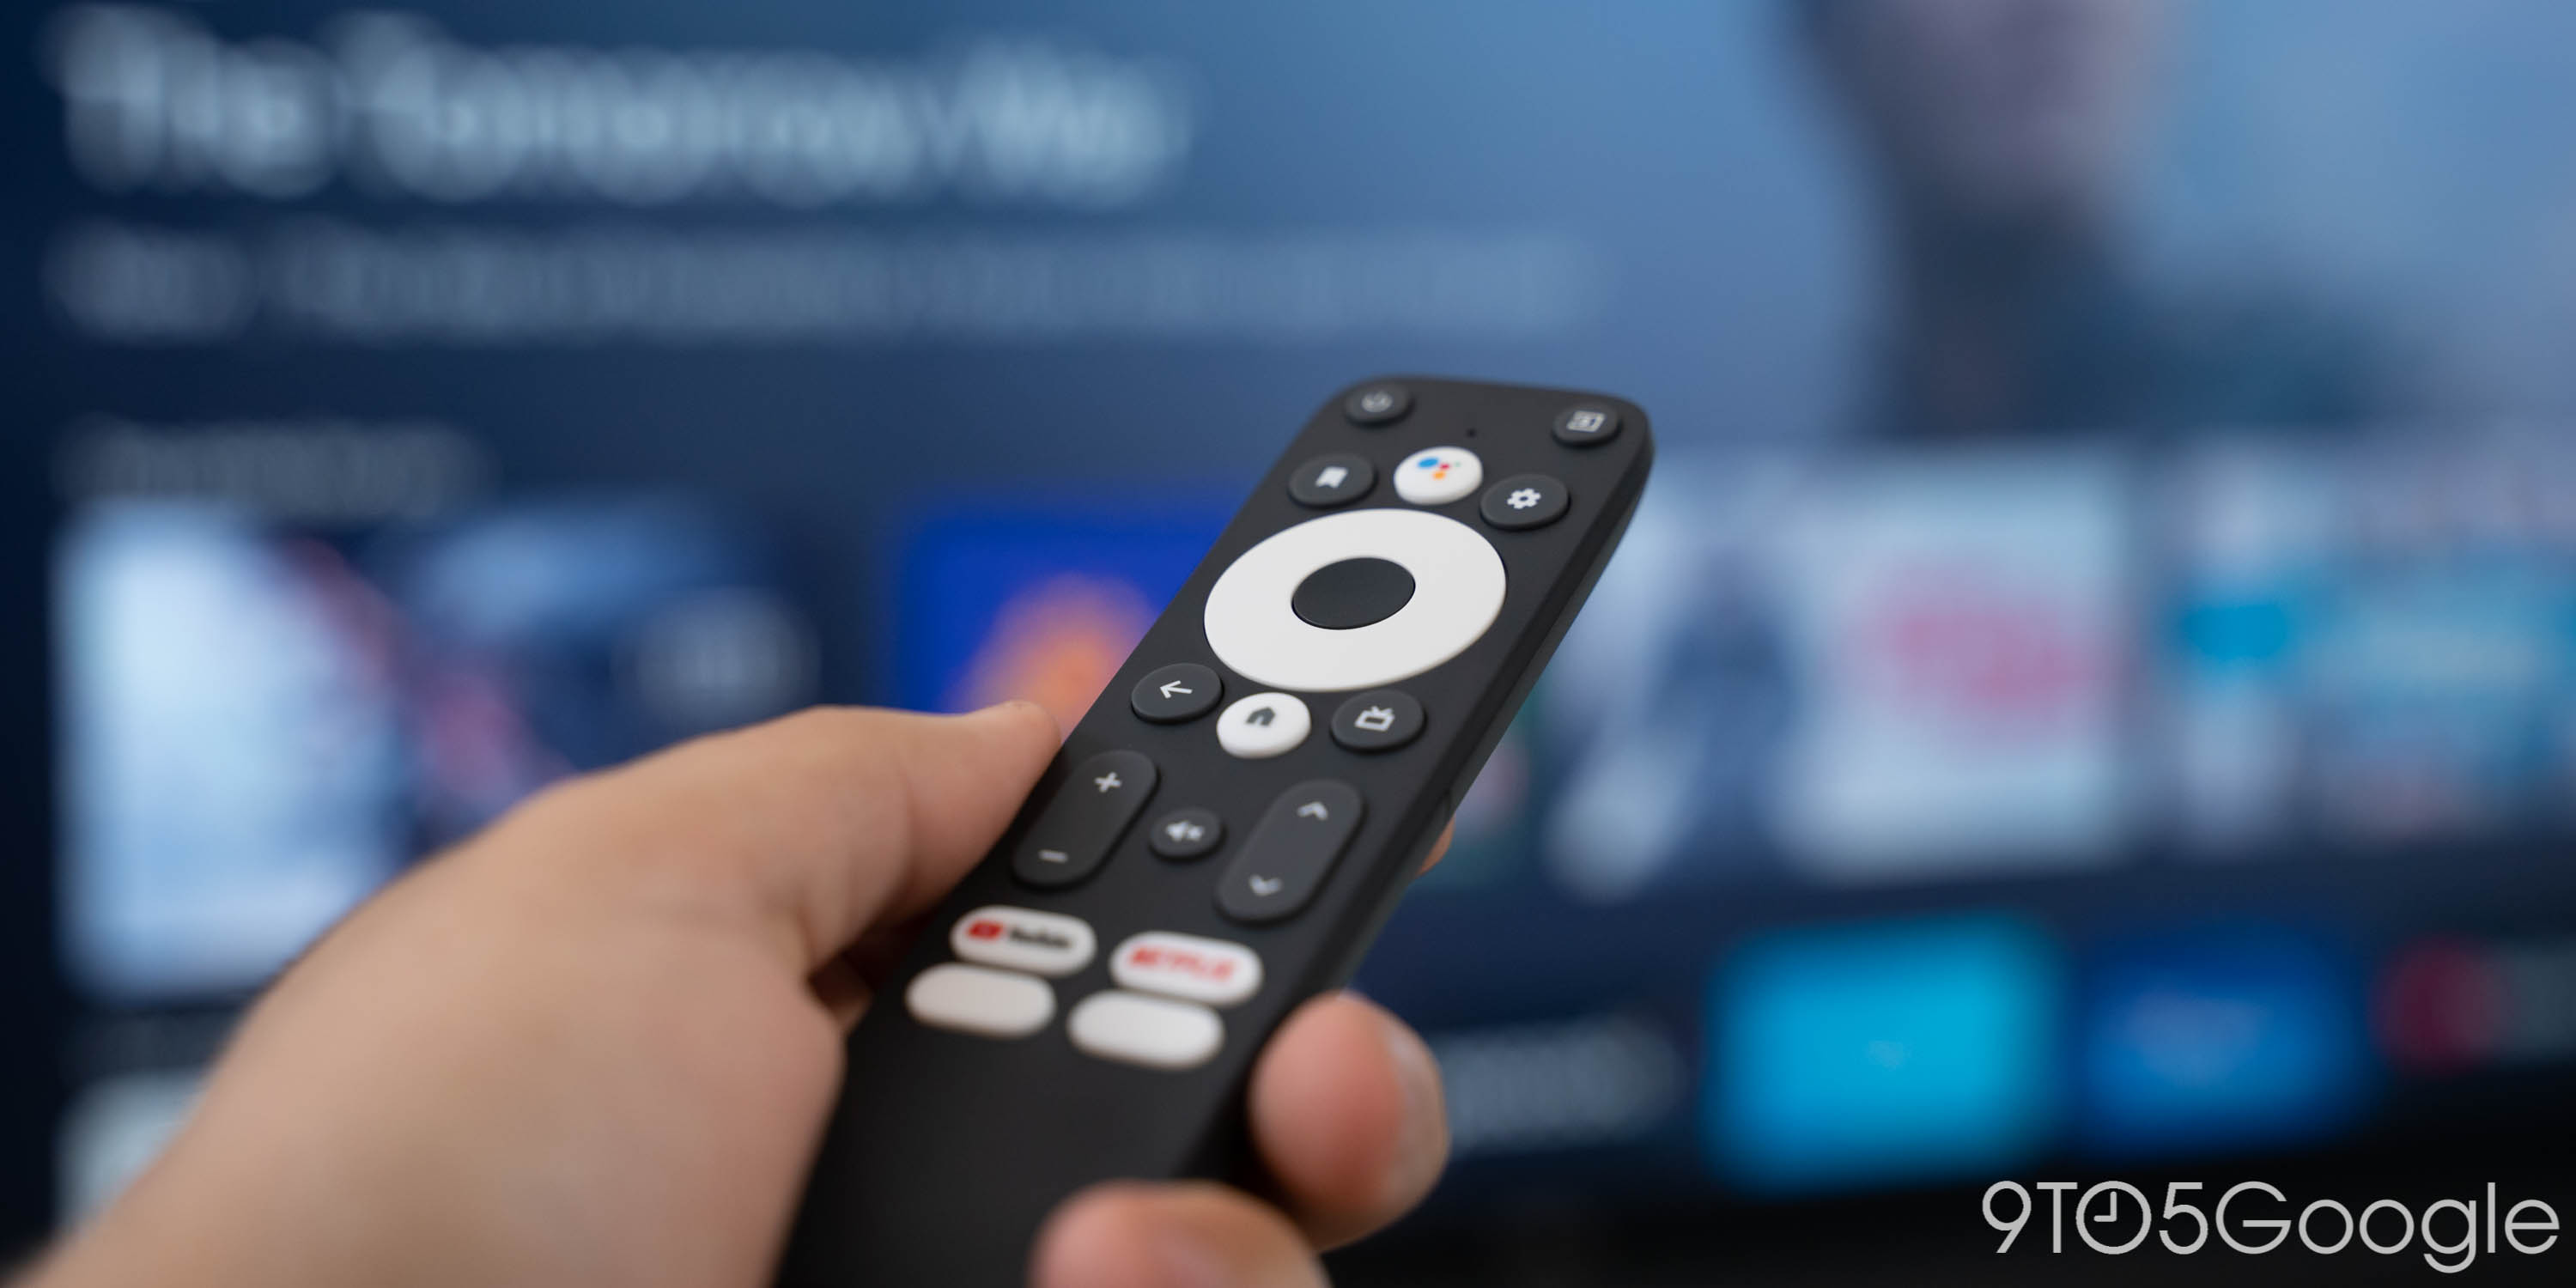 Google brings more than 300 free live TV channels to Google TV - MSPoweruser